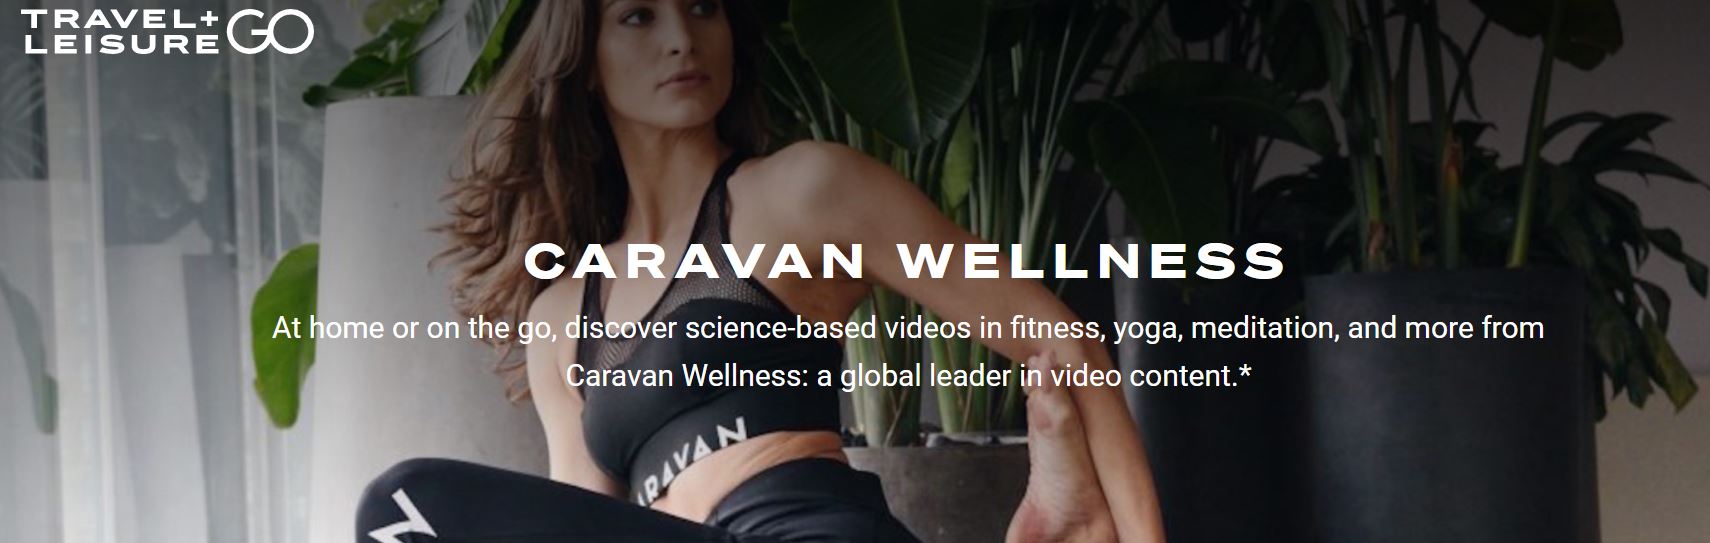 Caravan Wellness and Travel + Leisure GO Partner  to Bring Health and Wellness Resources to Busy Travelers